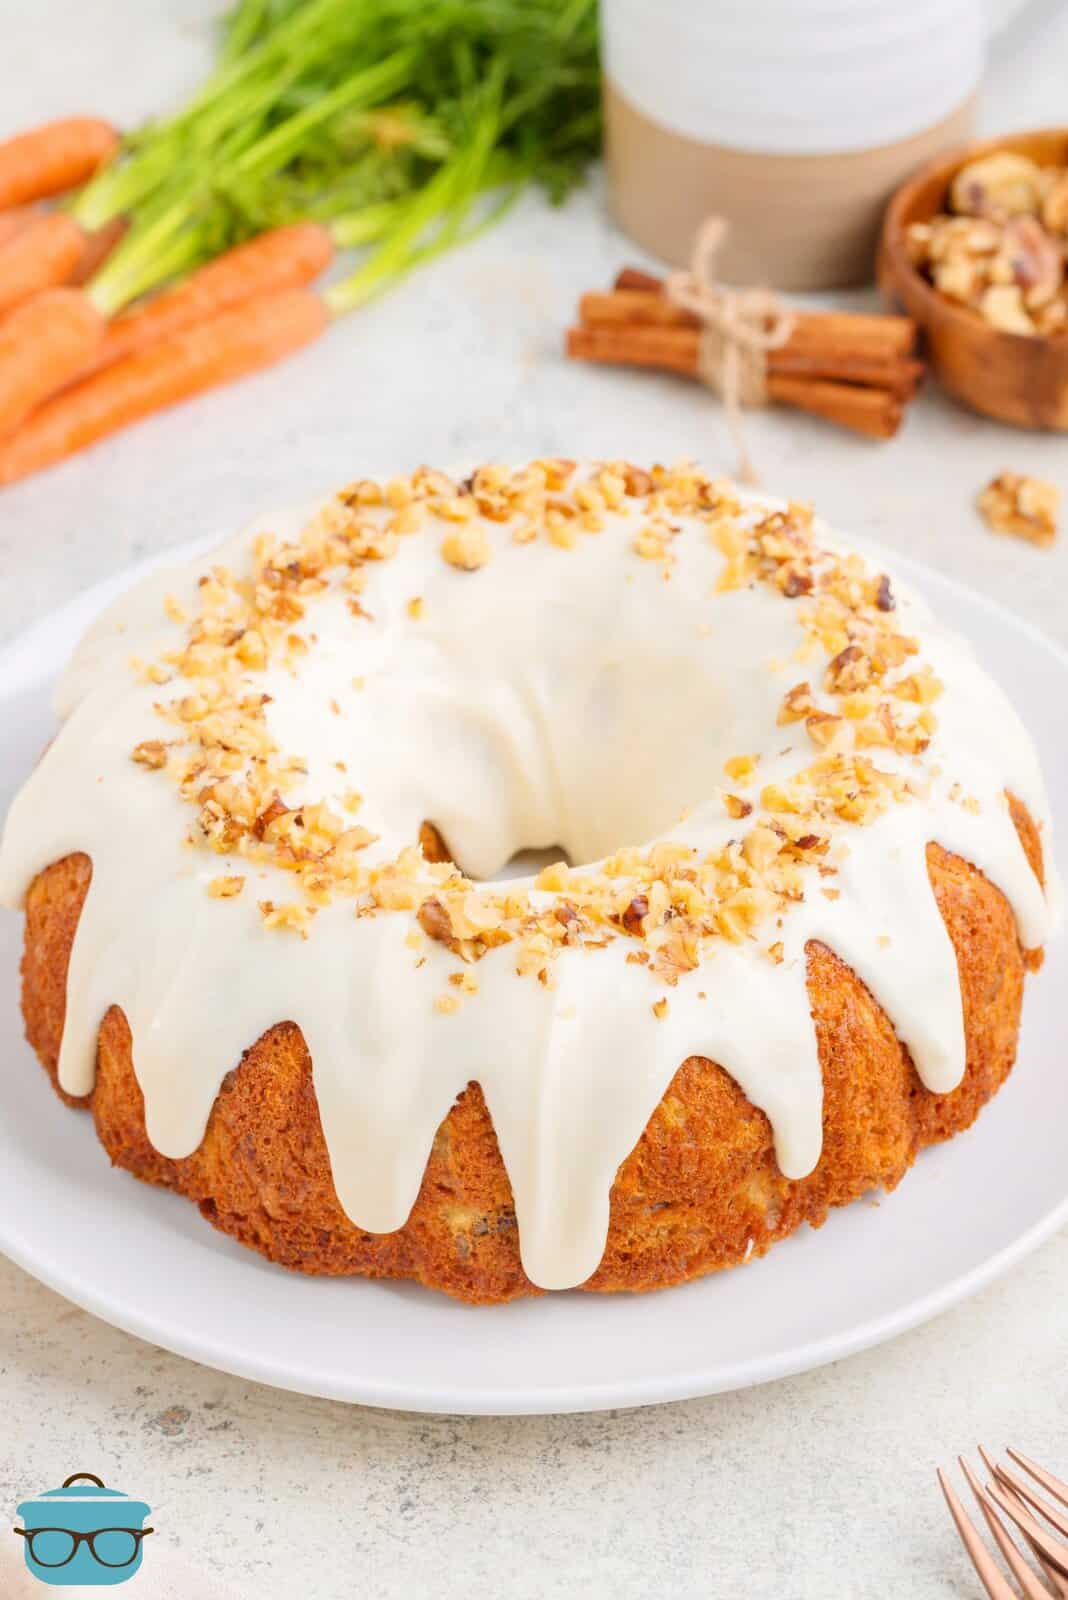 A homemade Carrot Bundt Cake with glaze on a serving plate.